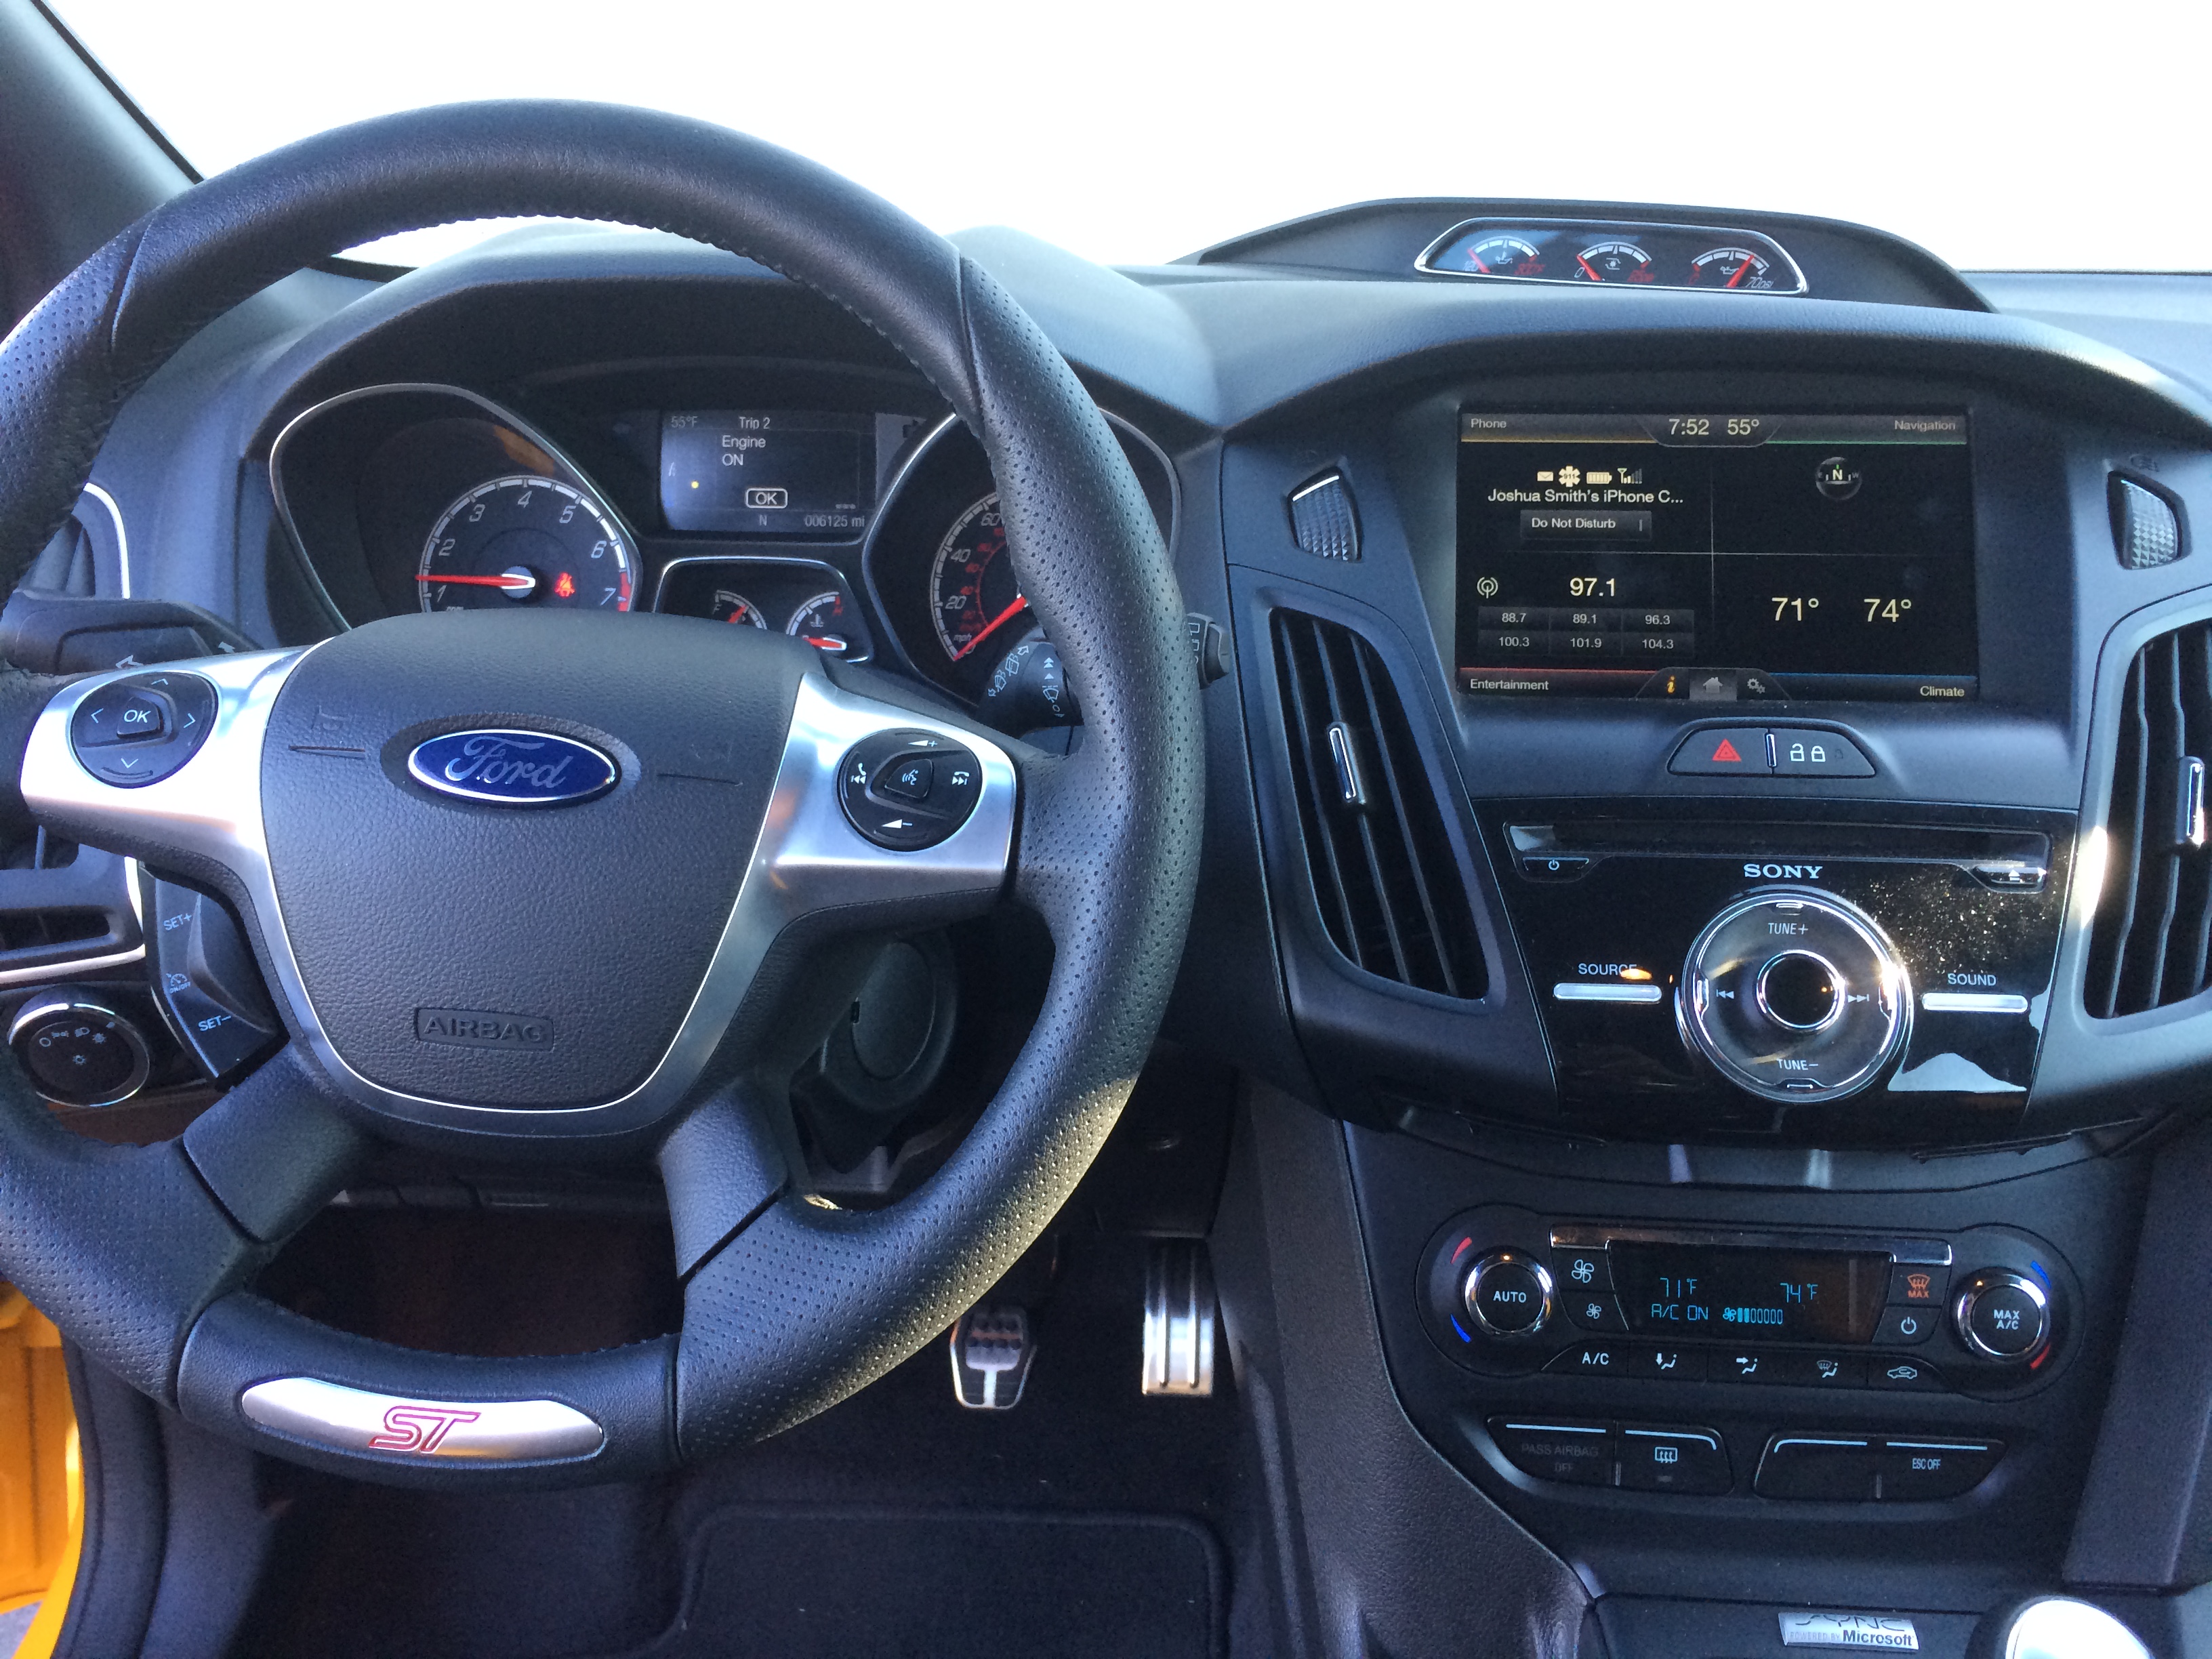 2014 Ford Focus St Review Motor Review